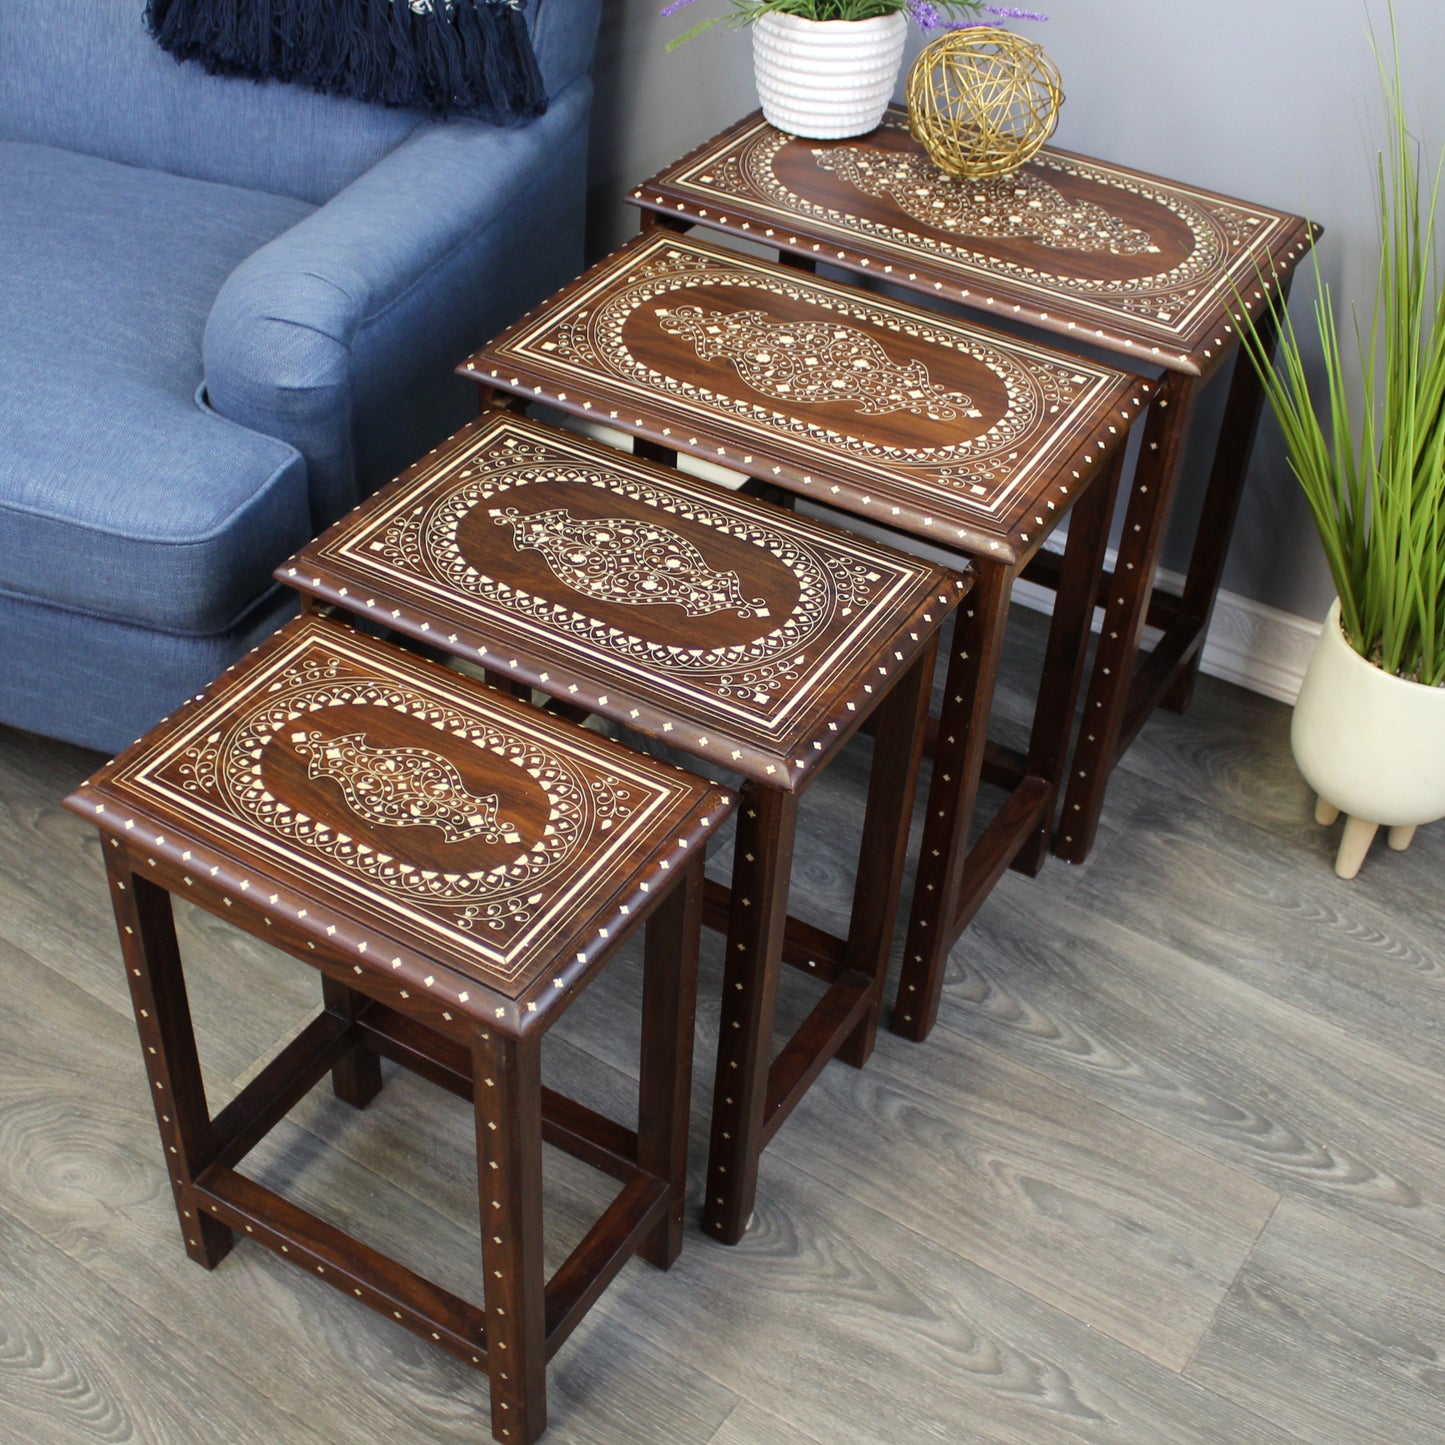 Natural Geo Decorative Rosewood Set of 4 Nesting Tables - White Oval